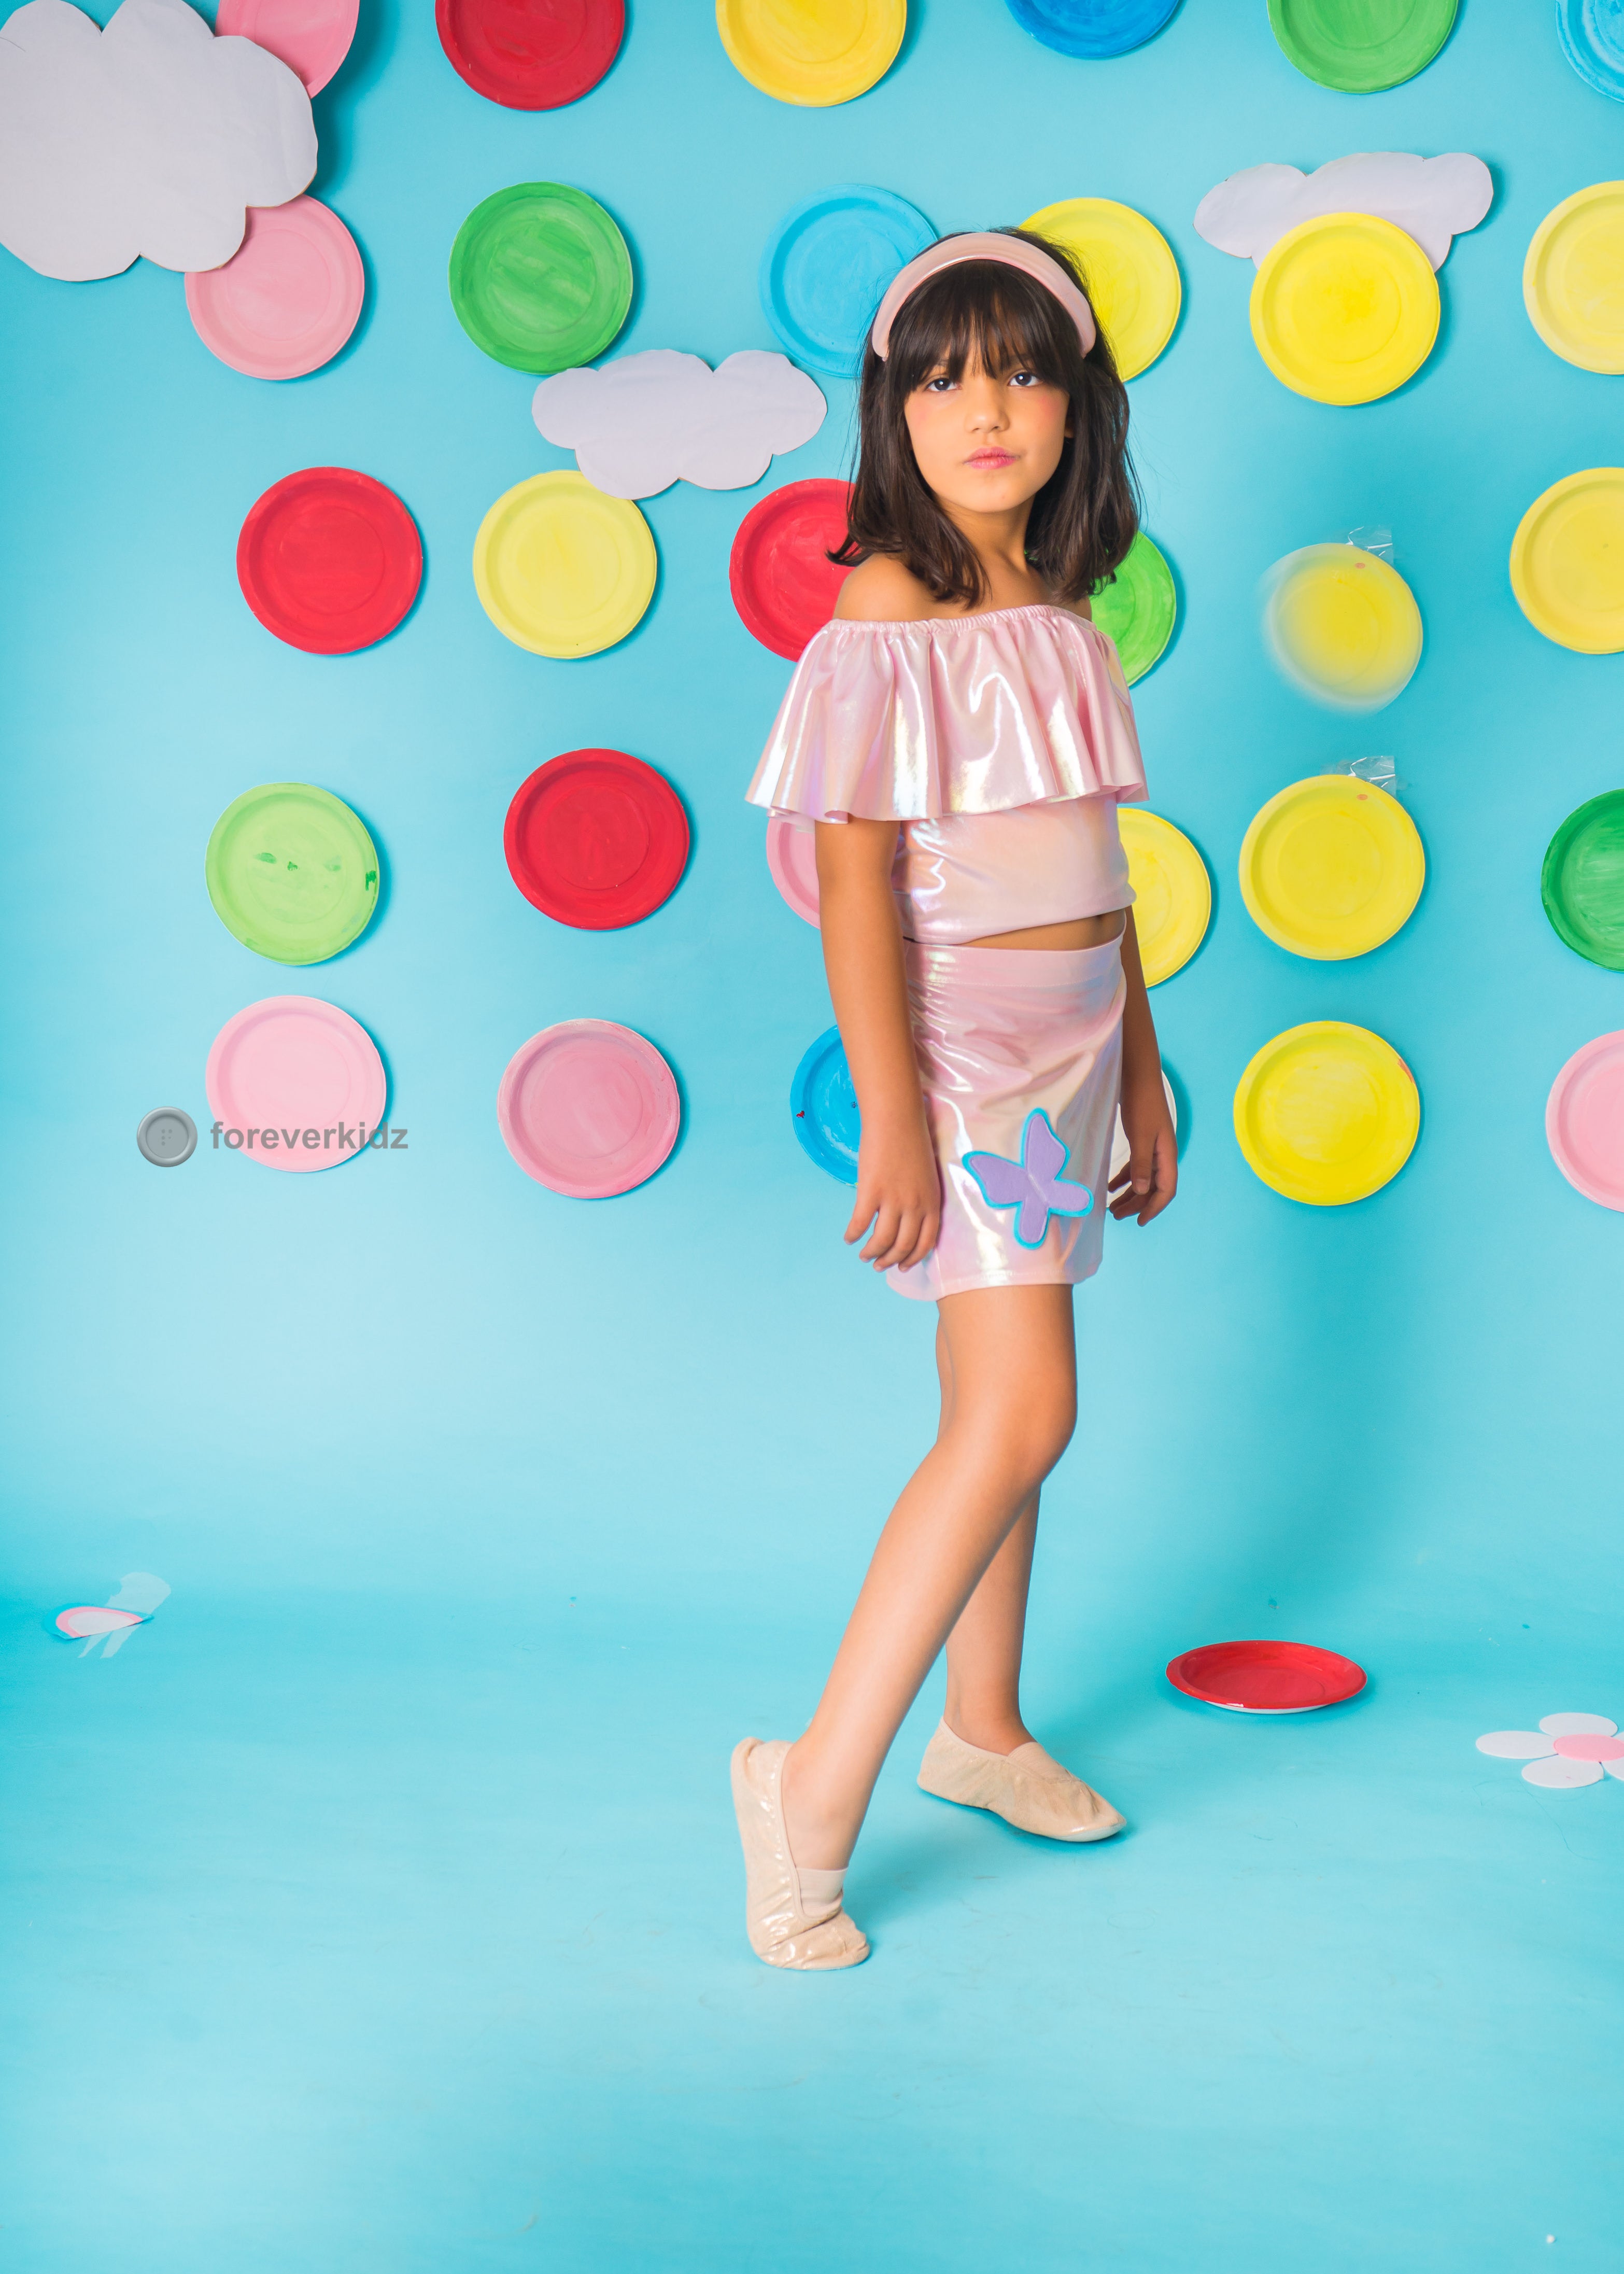 holographic dress for kids